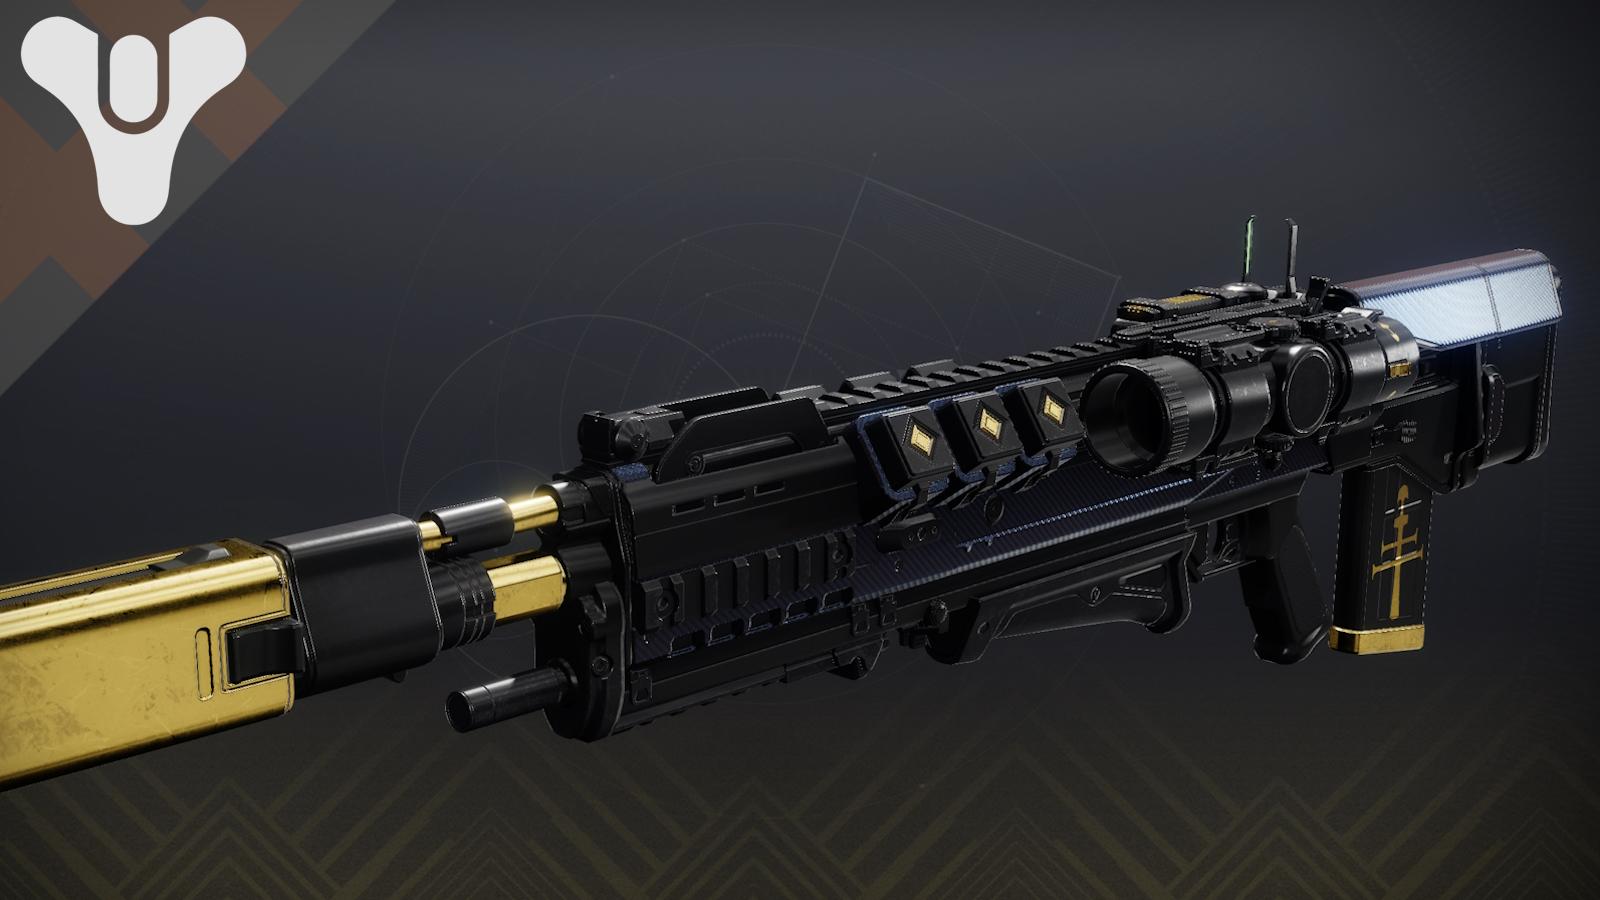 Revision Zero, an Exotic Pulse Rifle in Destiny 2 reintroduced in Season of the Witch.